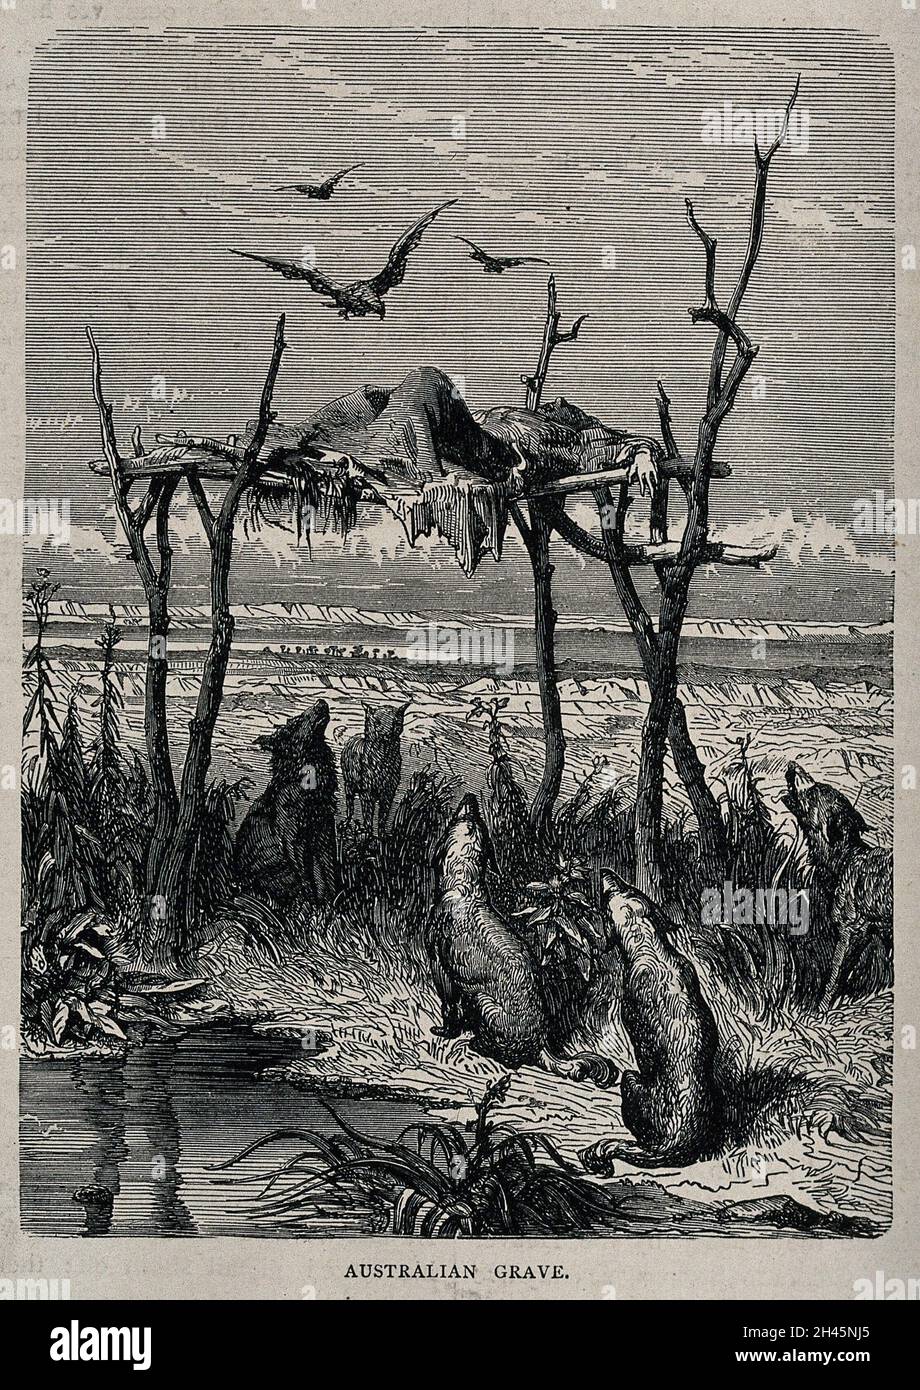 Australia: a dead body placed on an elevated wooden structure; dingos seated below. Wood engraving after G. Doré, ca. 1865. Stock Photo